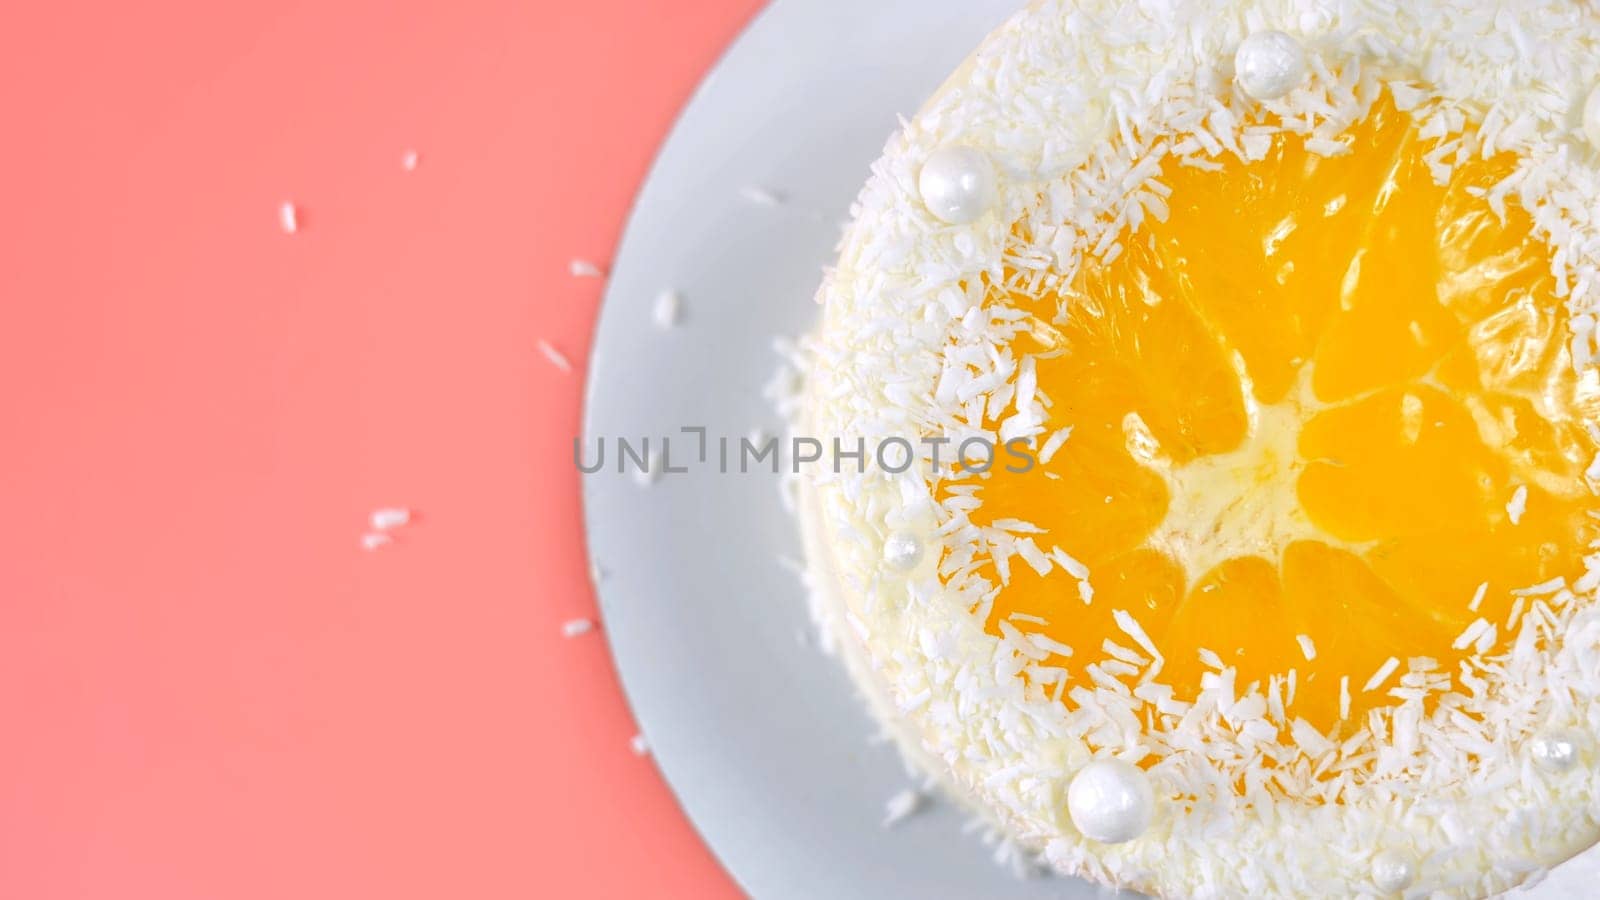 Cake with orange and coconut shavings spun on a pink background. by DovidPro